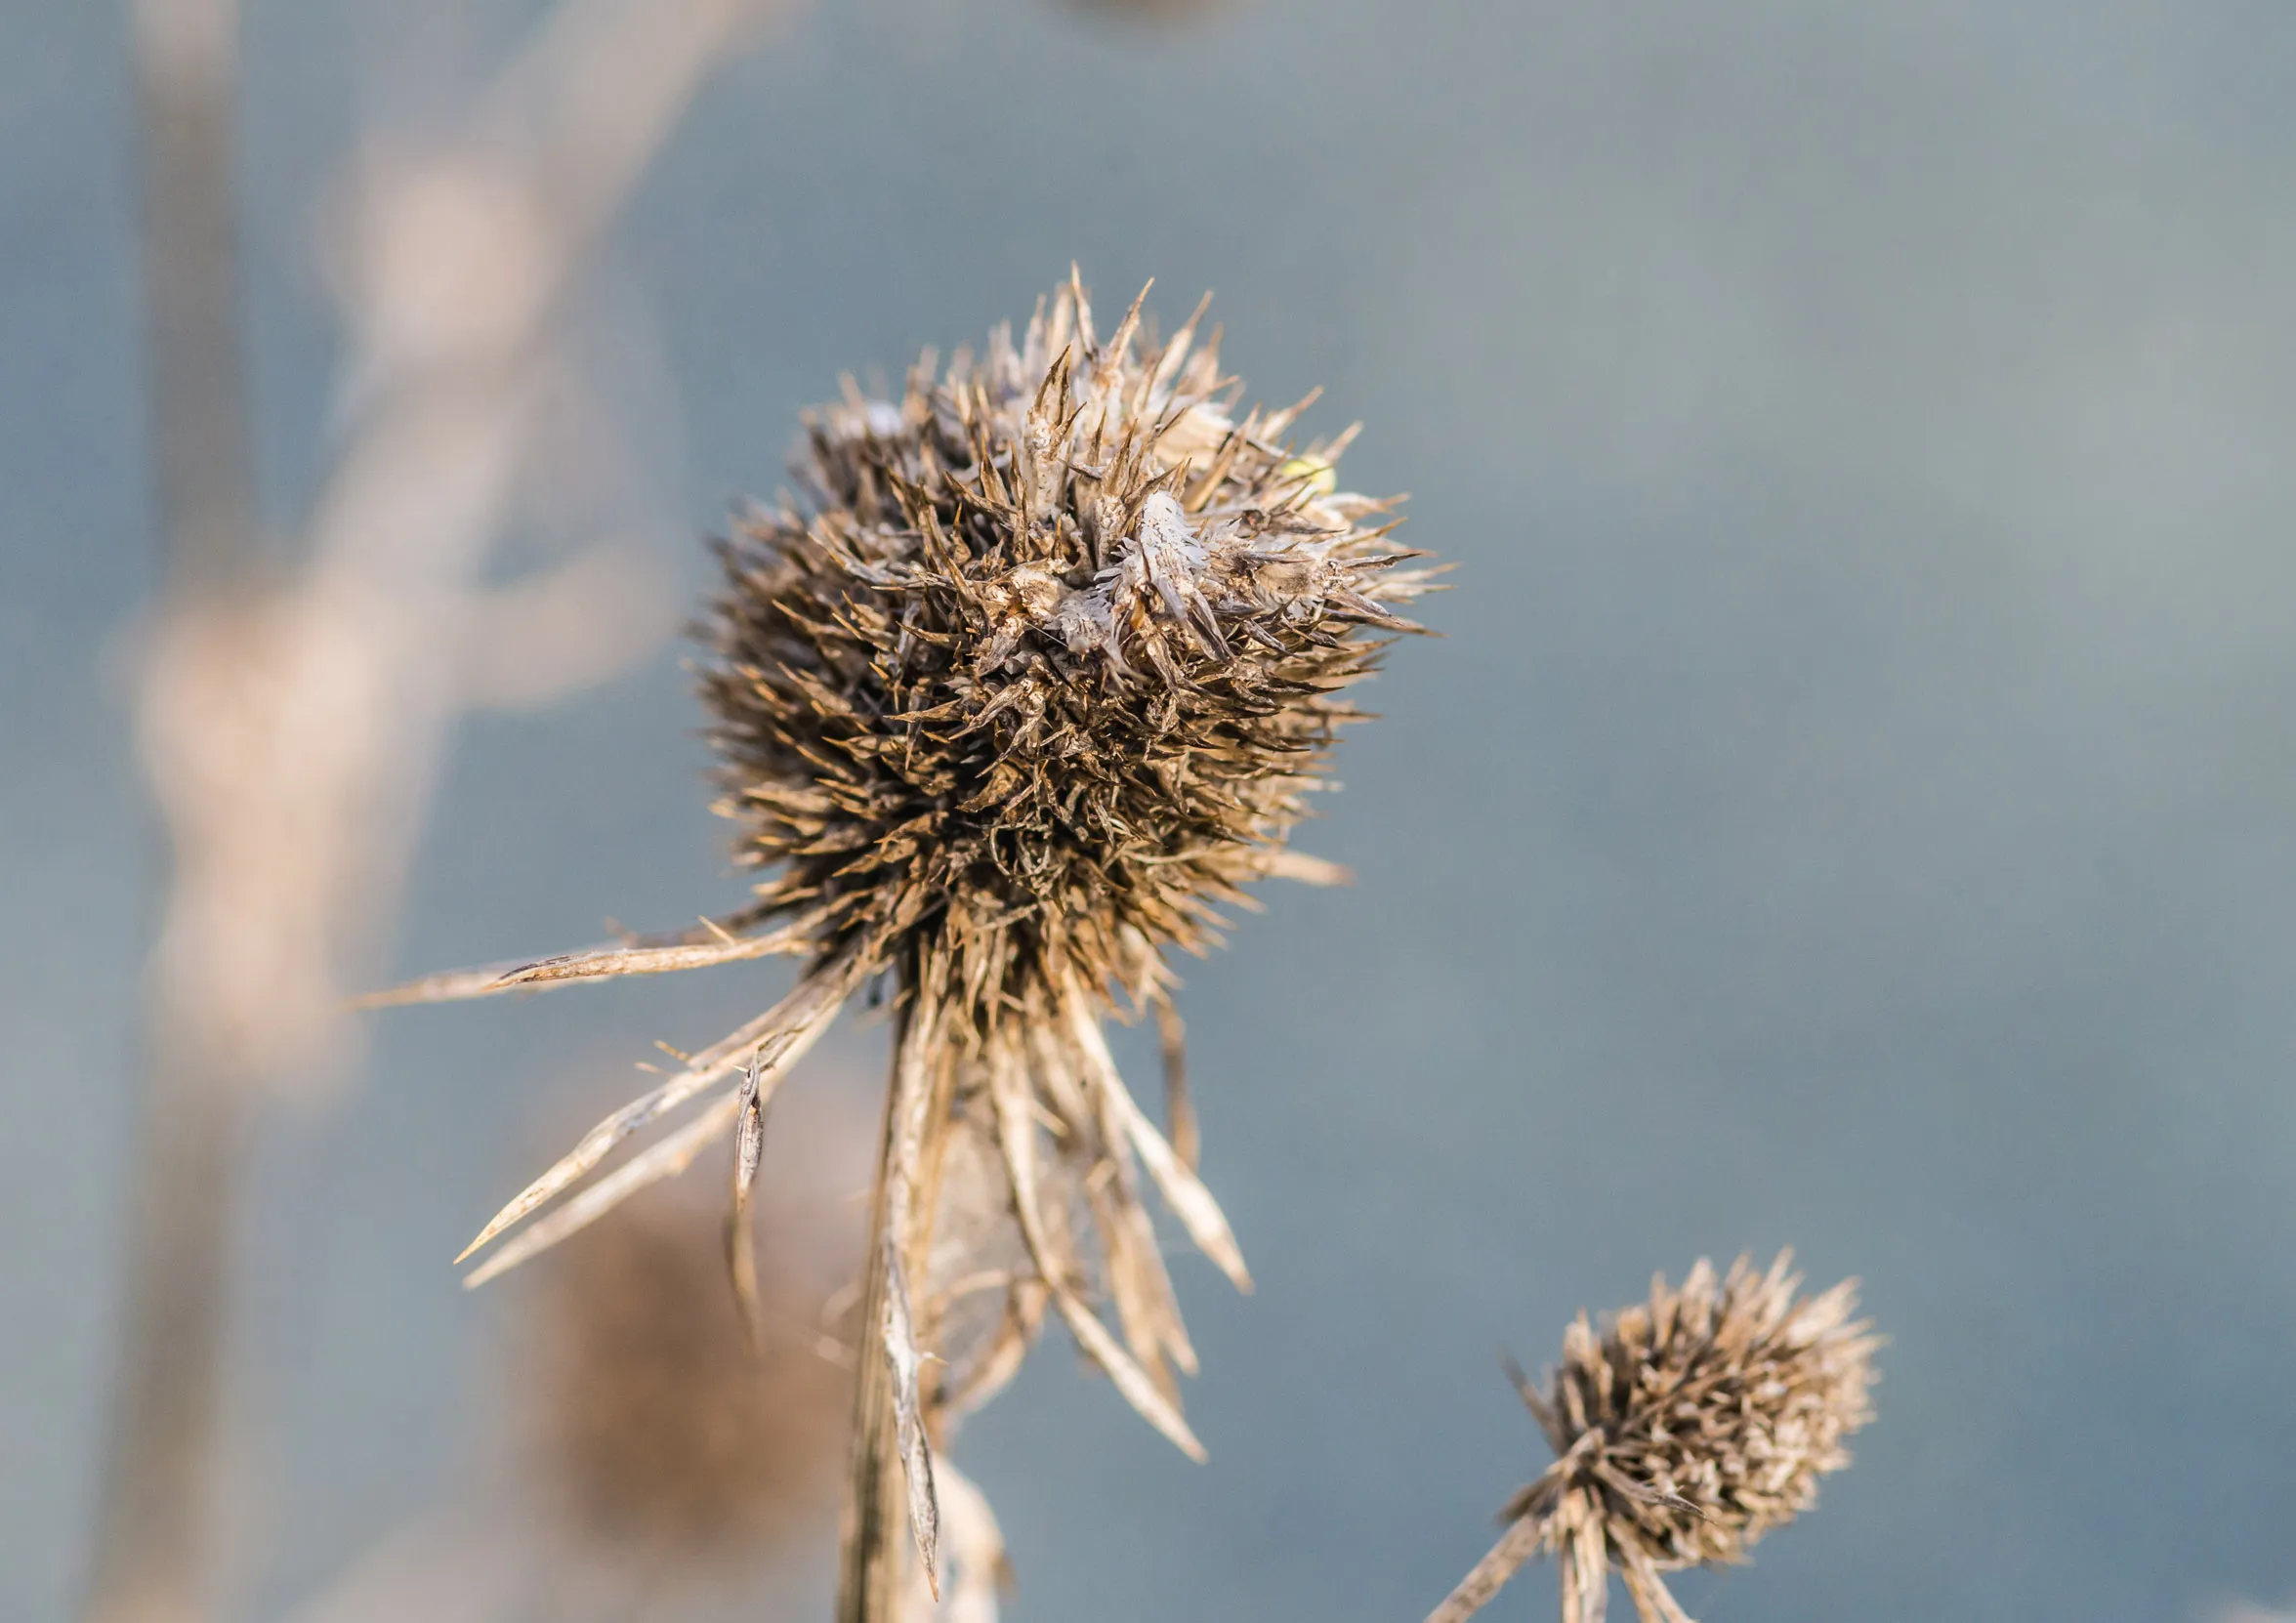 The dried seedhead of a Sea-holly flower.